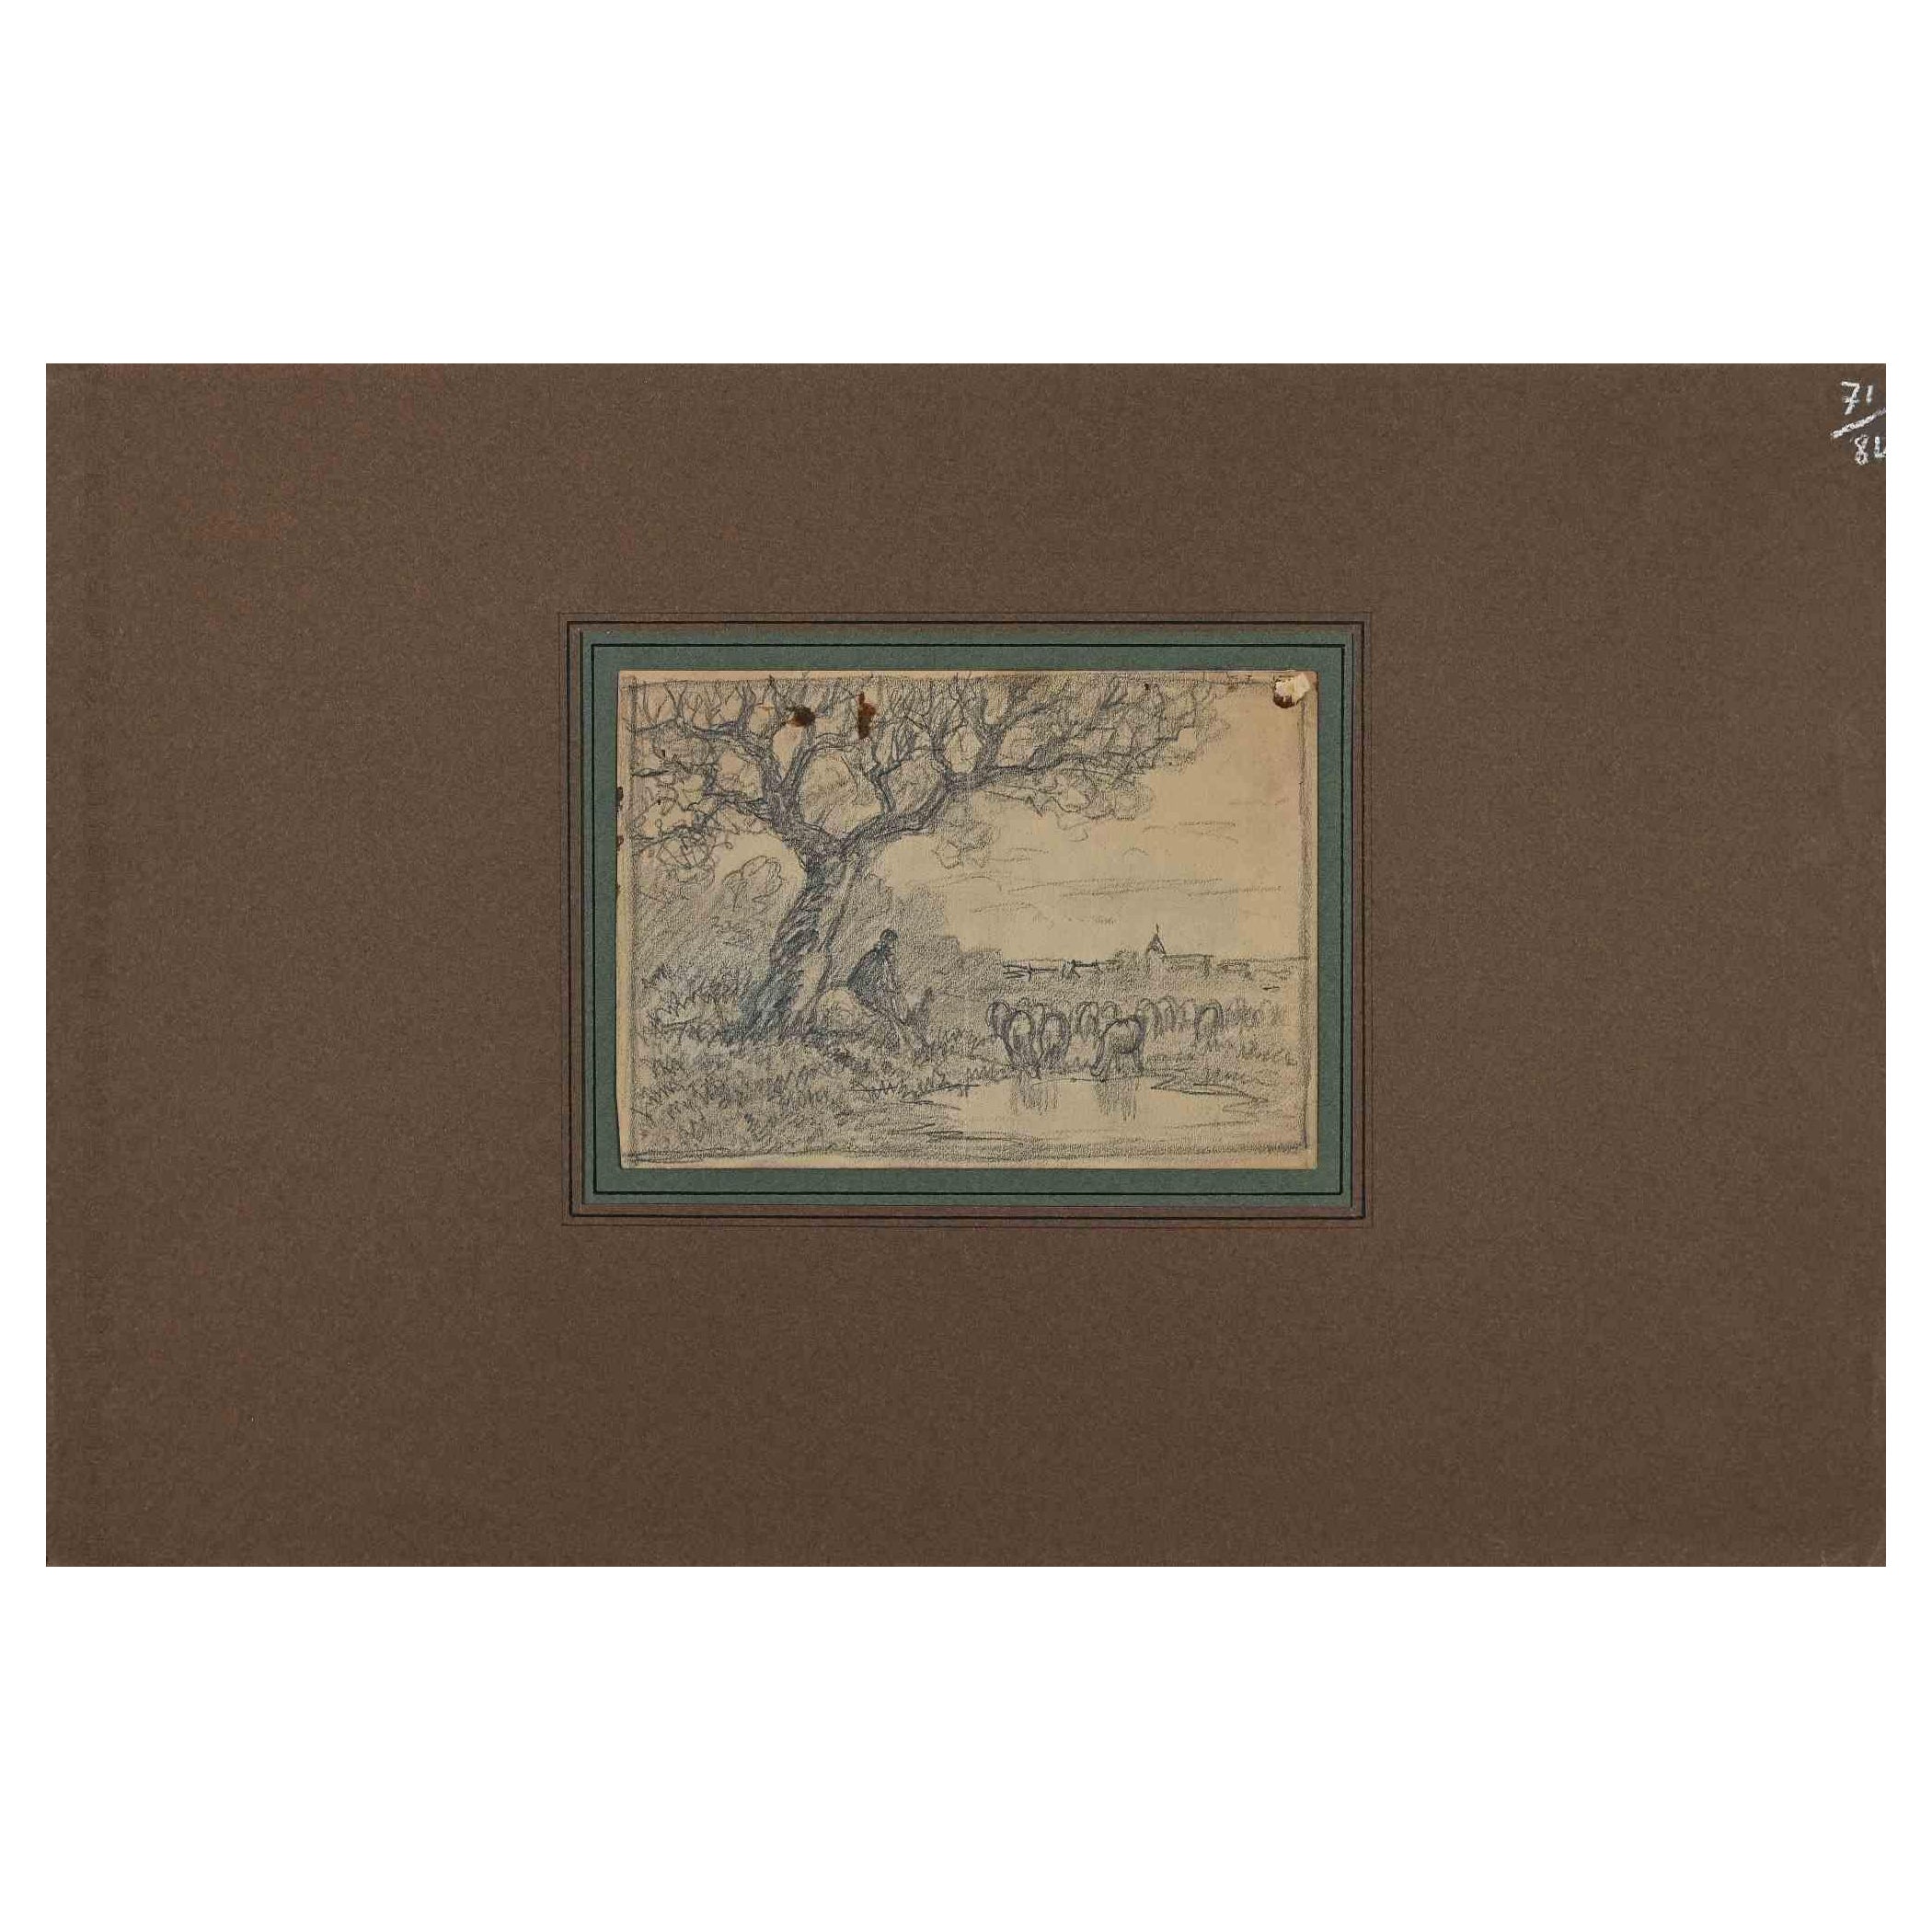  Landscape - Original Drawing on Paper by Ferdinand Chaigneau - Mid 19th Century